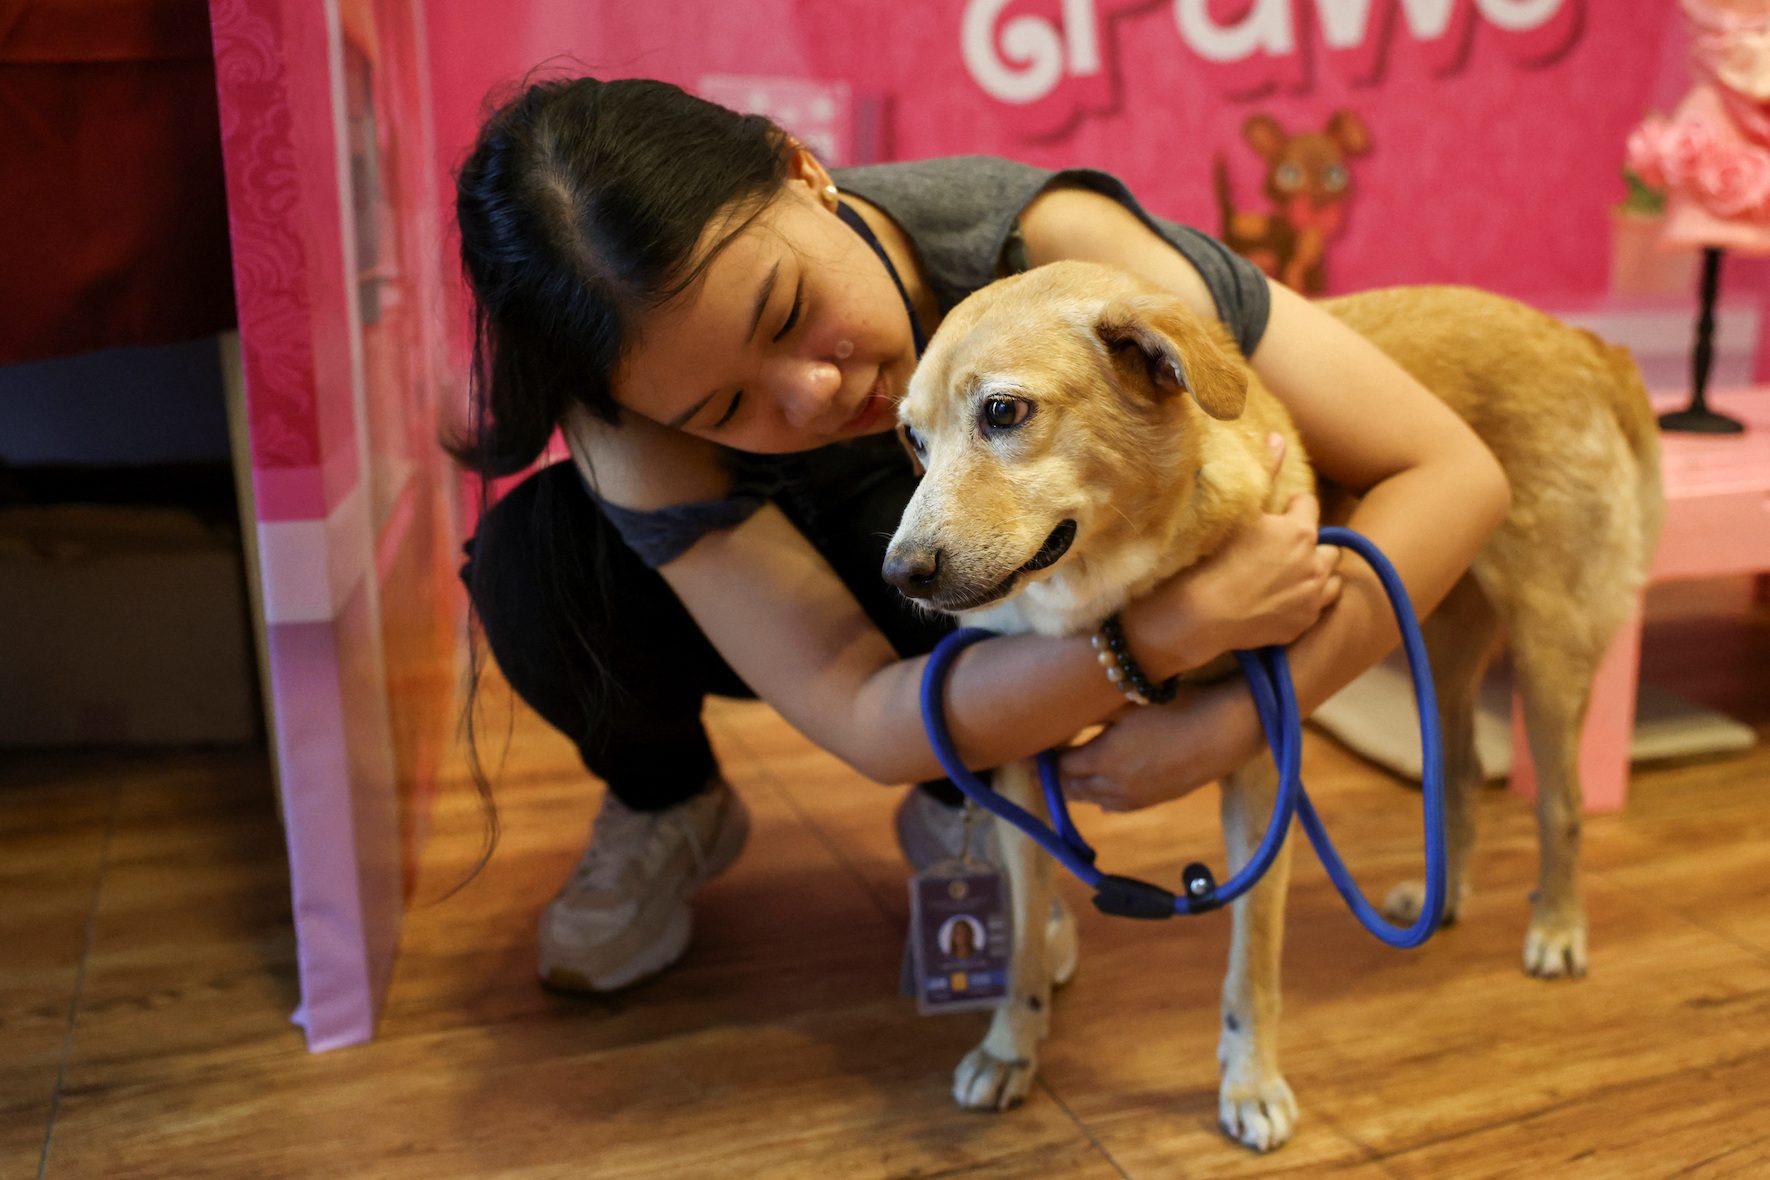 Rescued pets look for love on dates this Valentine’s Day